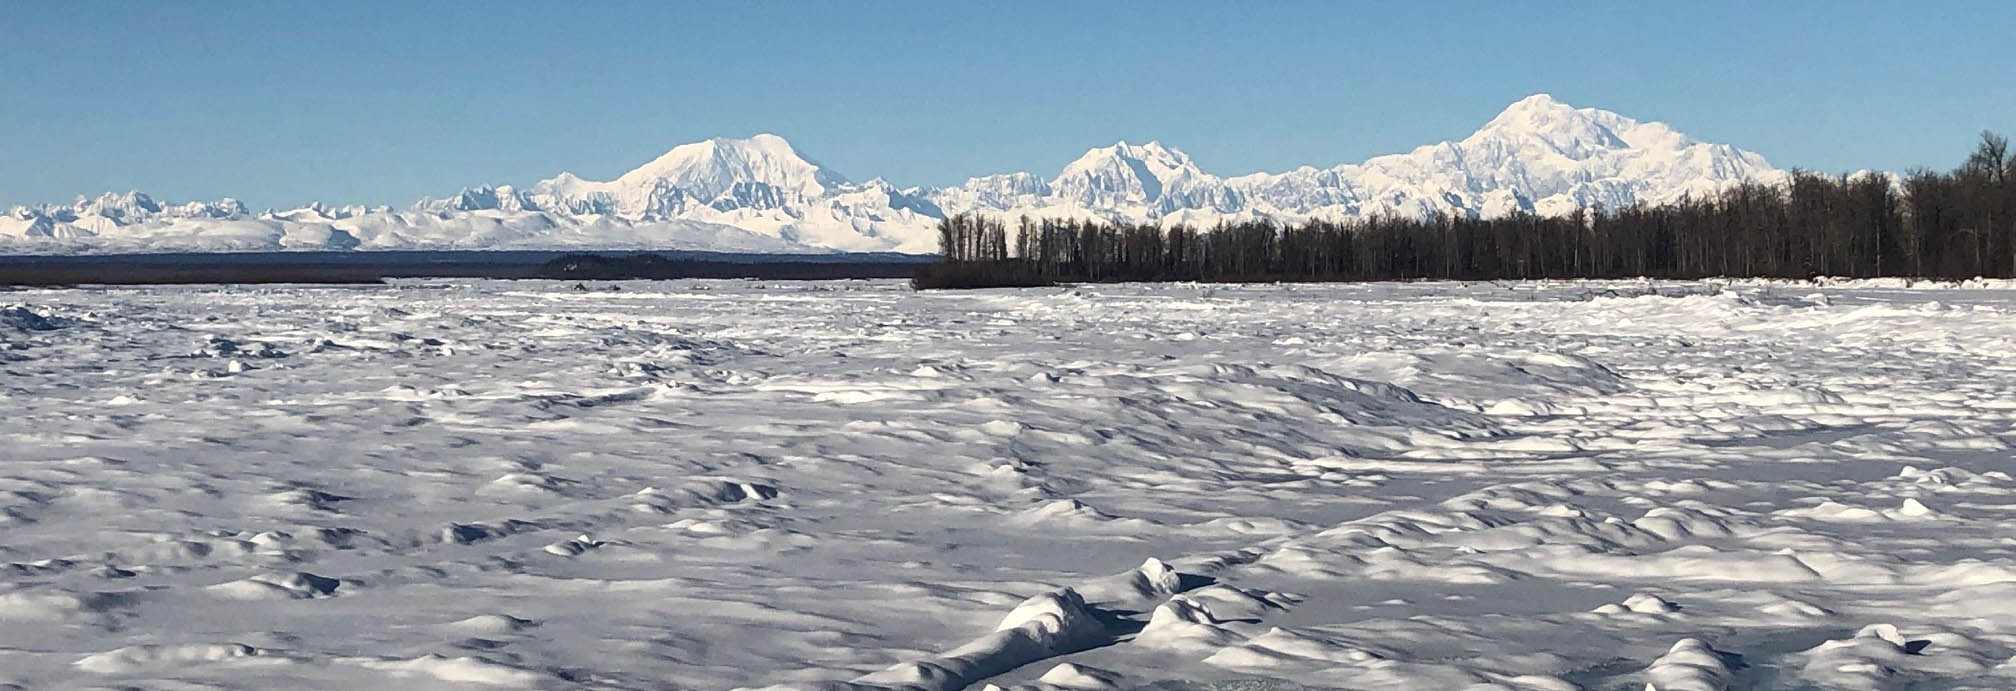 A view of Denali from the junction of the Talkeetna and Susitna Rivers,  the traditional land of the Dena’ina.